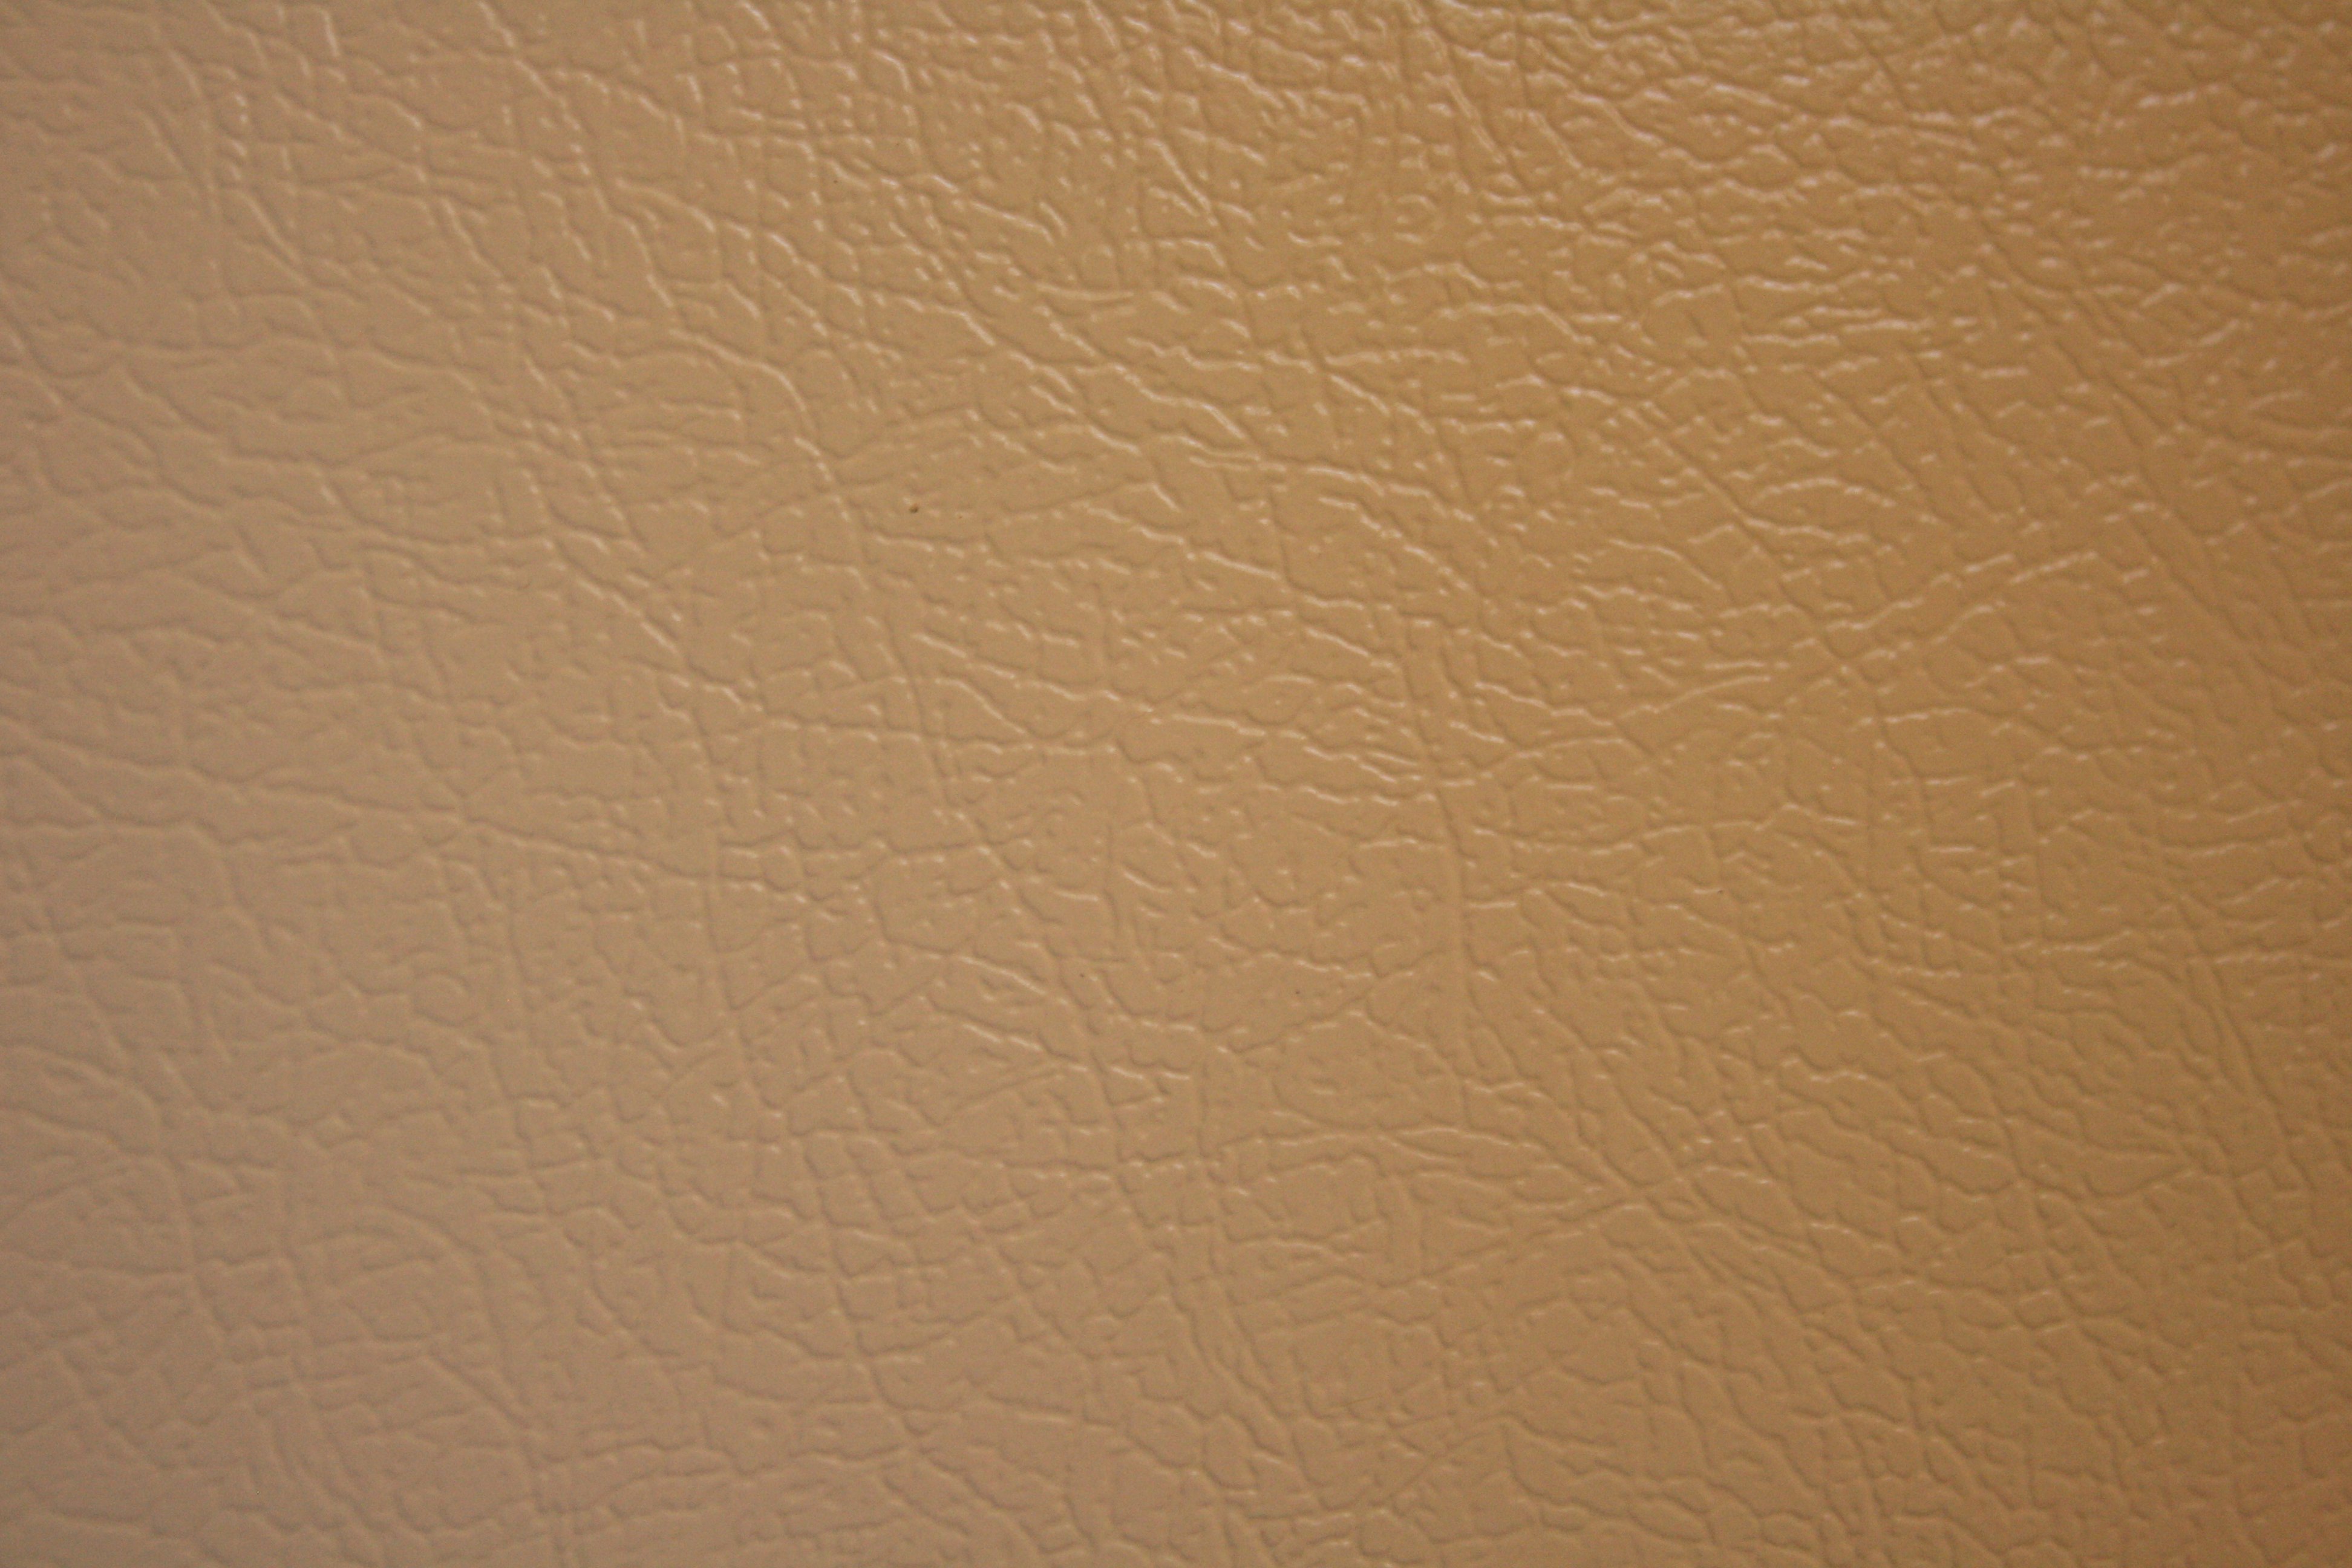 Tan Faux Leather Texture